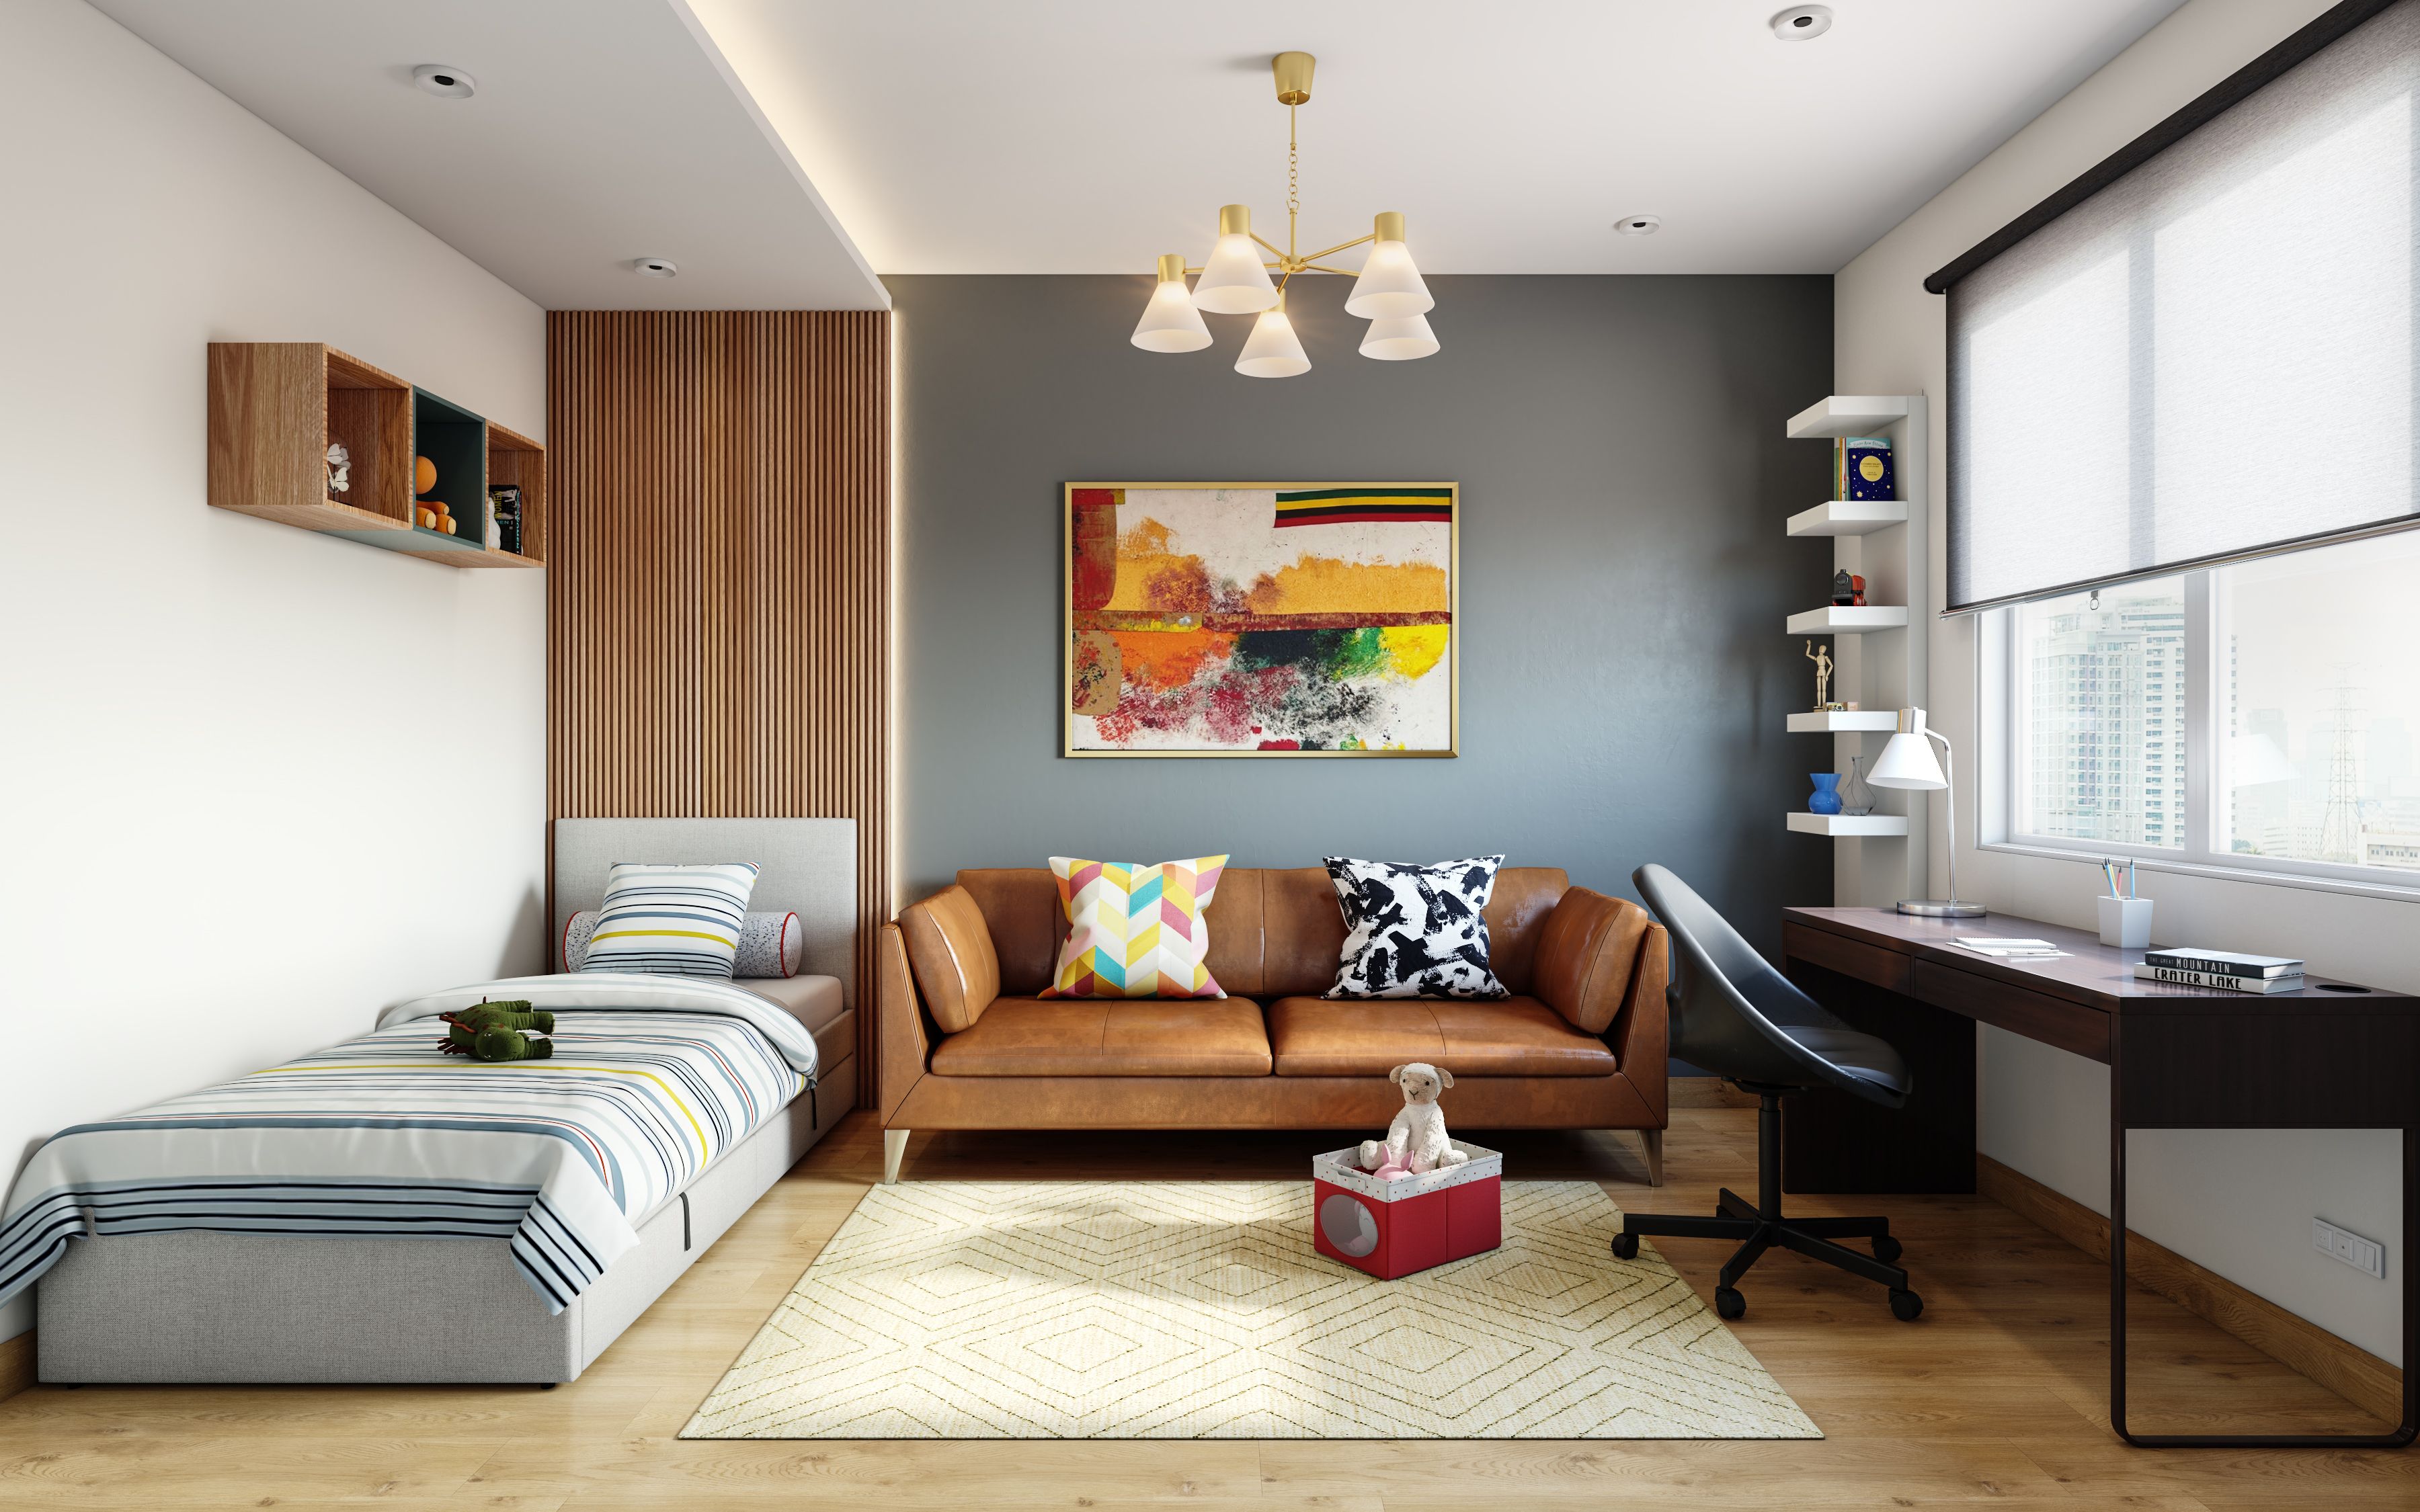 Modern Kid's Bedroom Design With Leather Sofa And Large Study